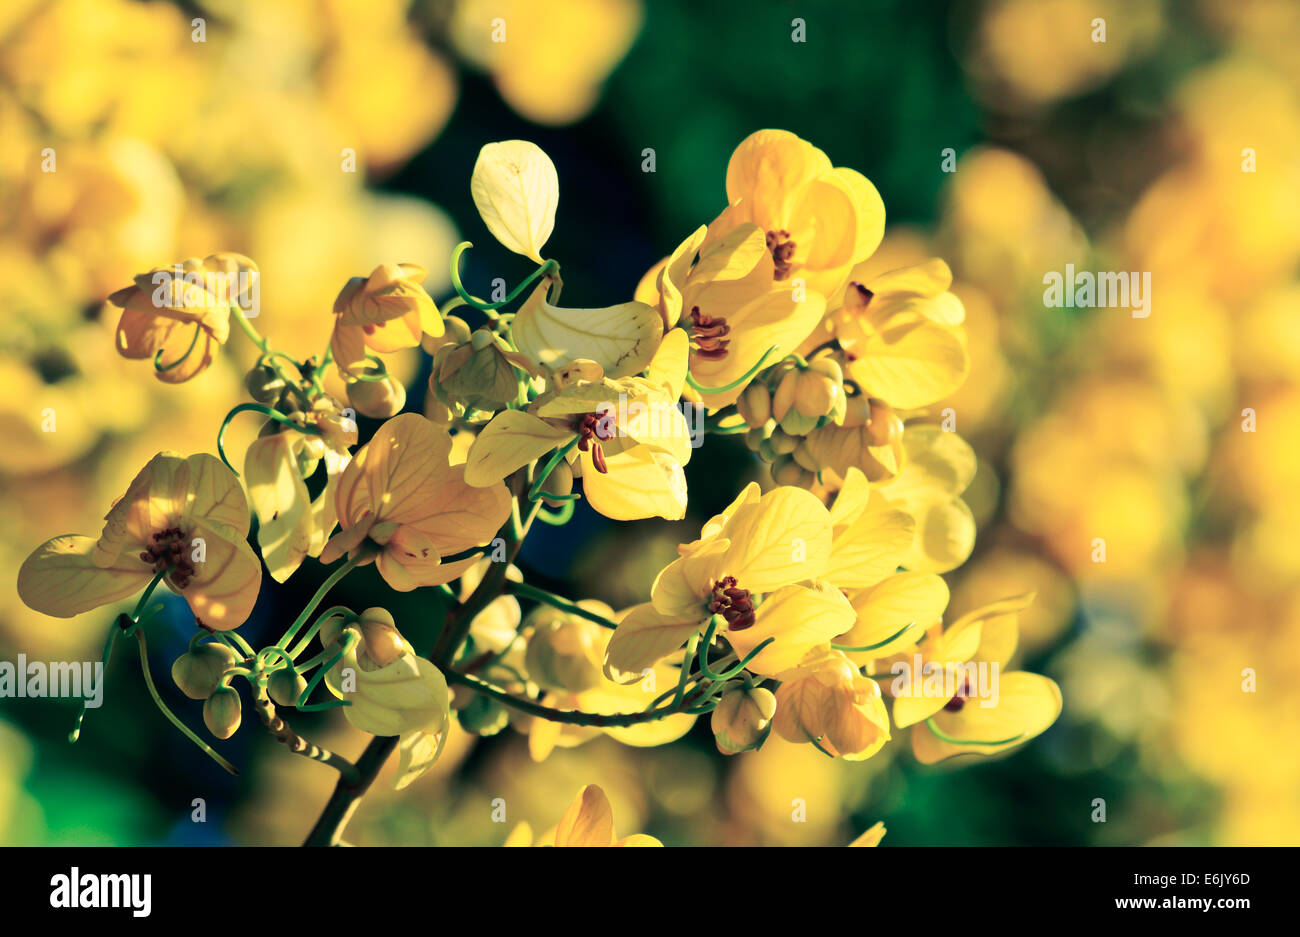 closeup of  yellow  flowers  on tree (Senna siamea Lam)  with vintage filter ;  blur background Stock Photo